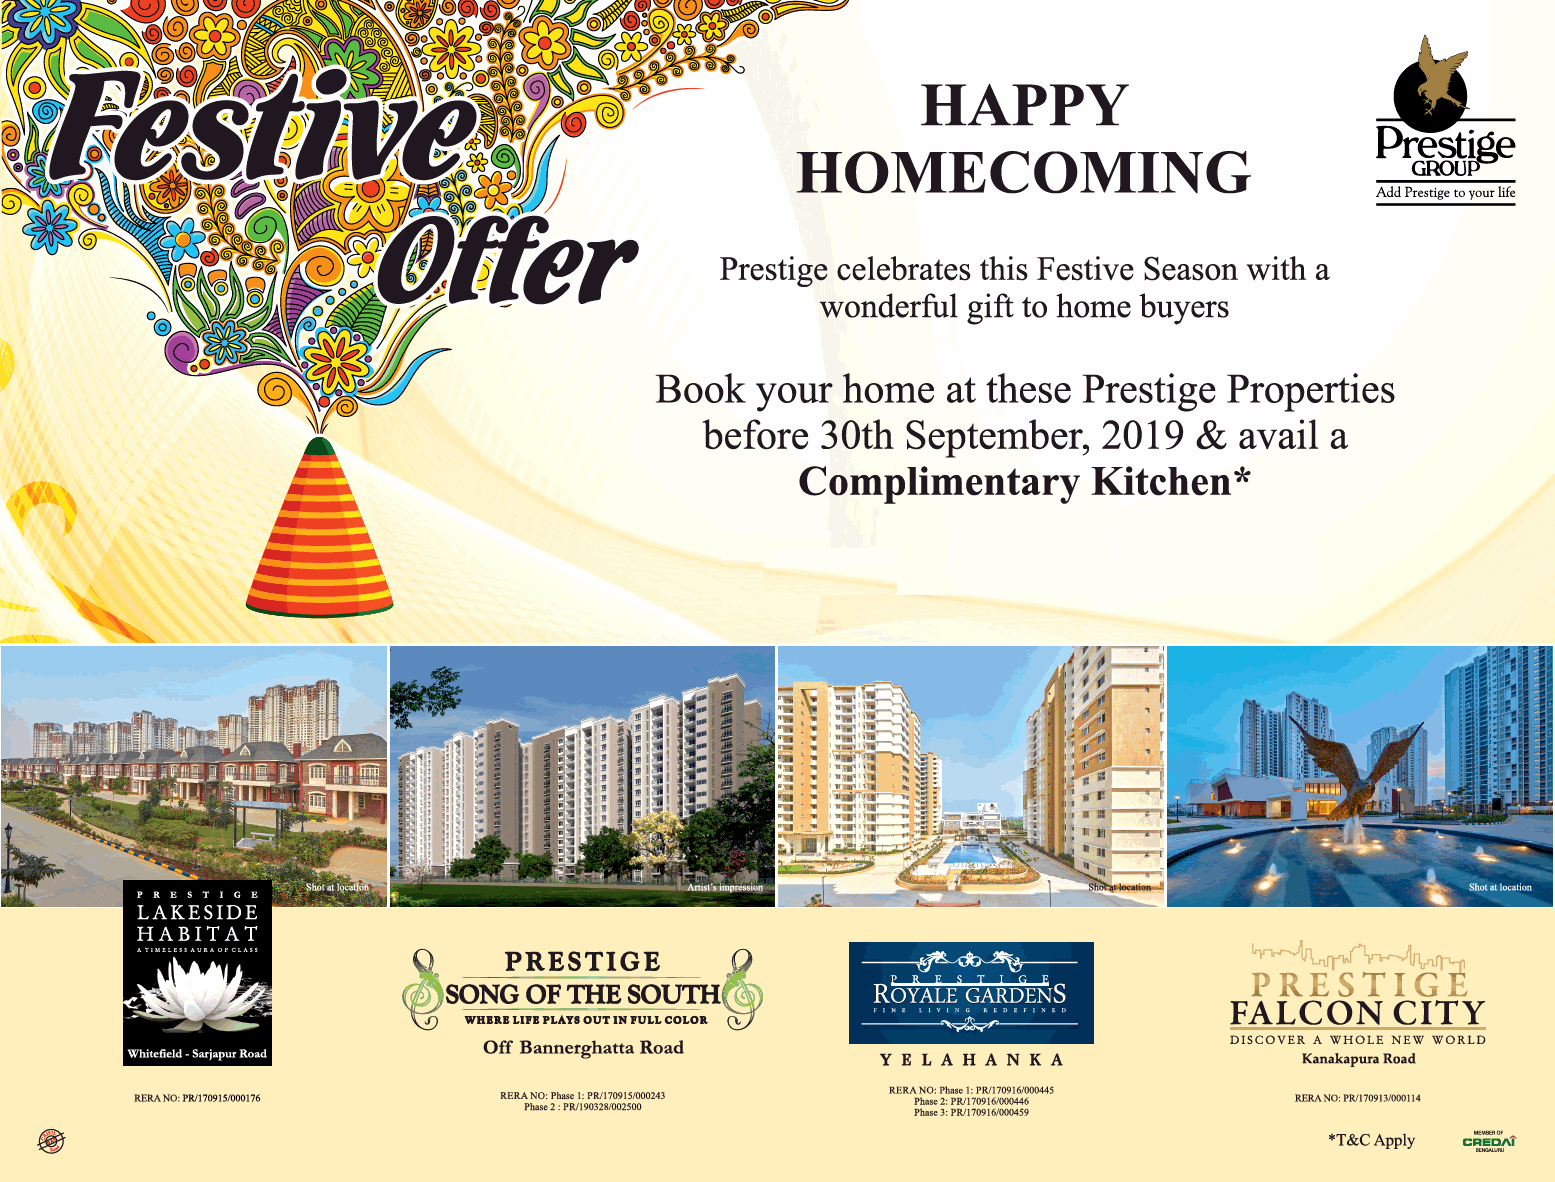 Book your home at these Prestige Properties before 30th September, 2019 & avail a complimentary kitchen, Bangalore Update